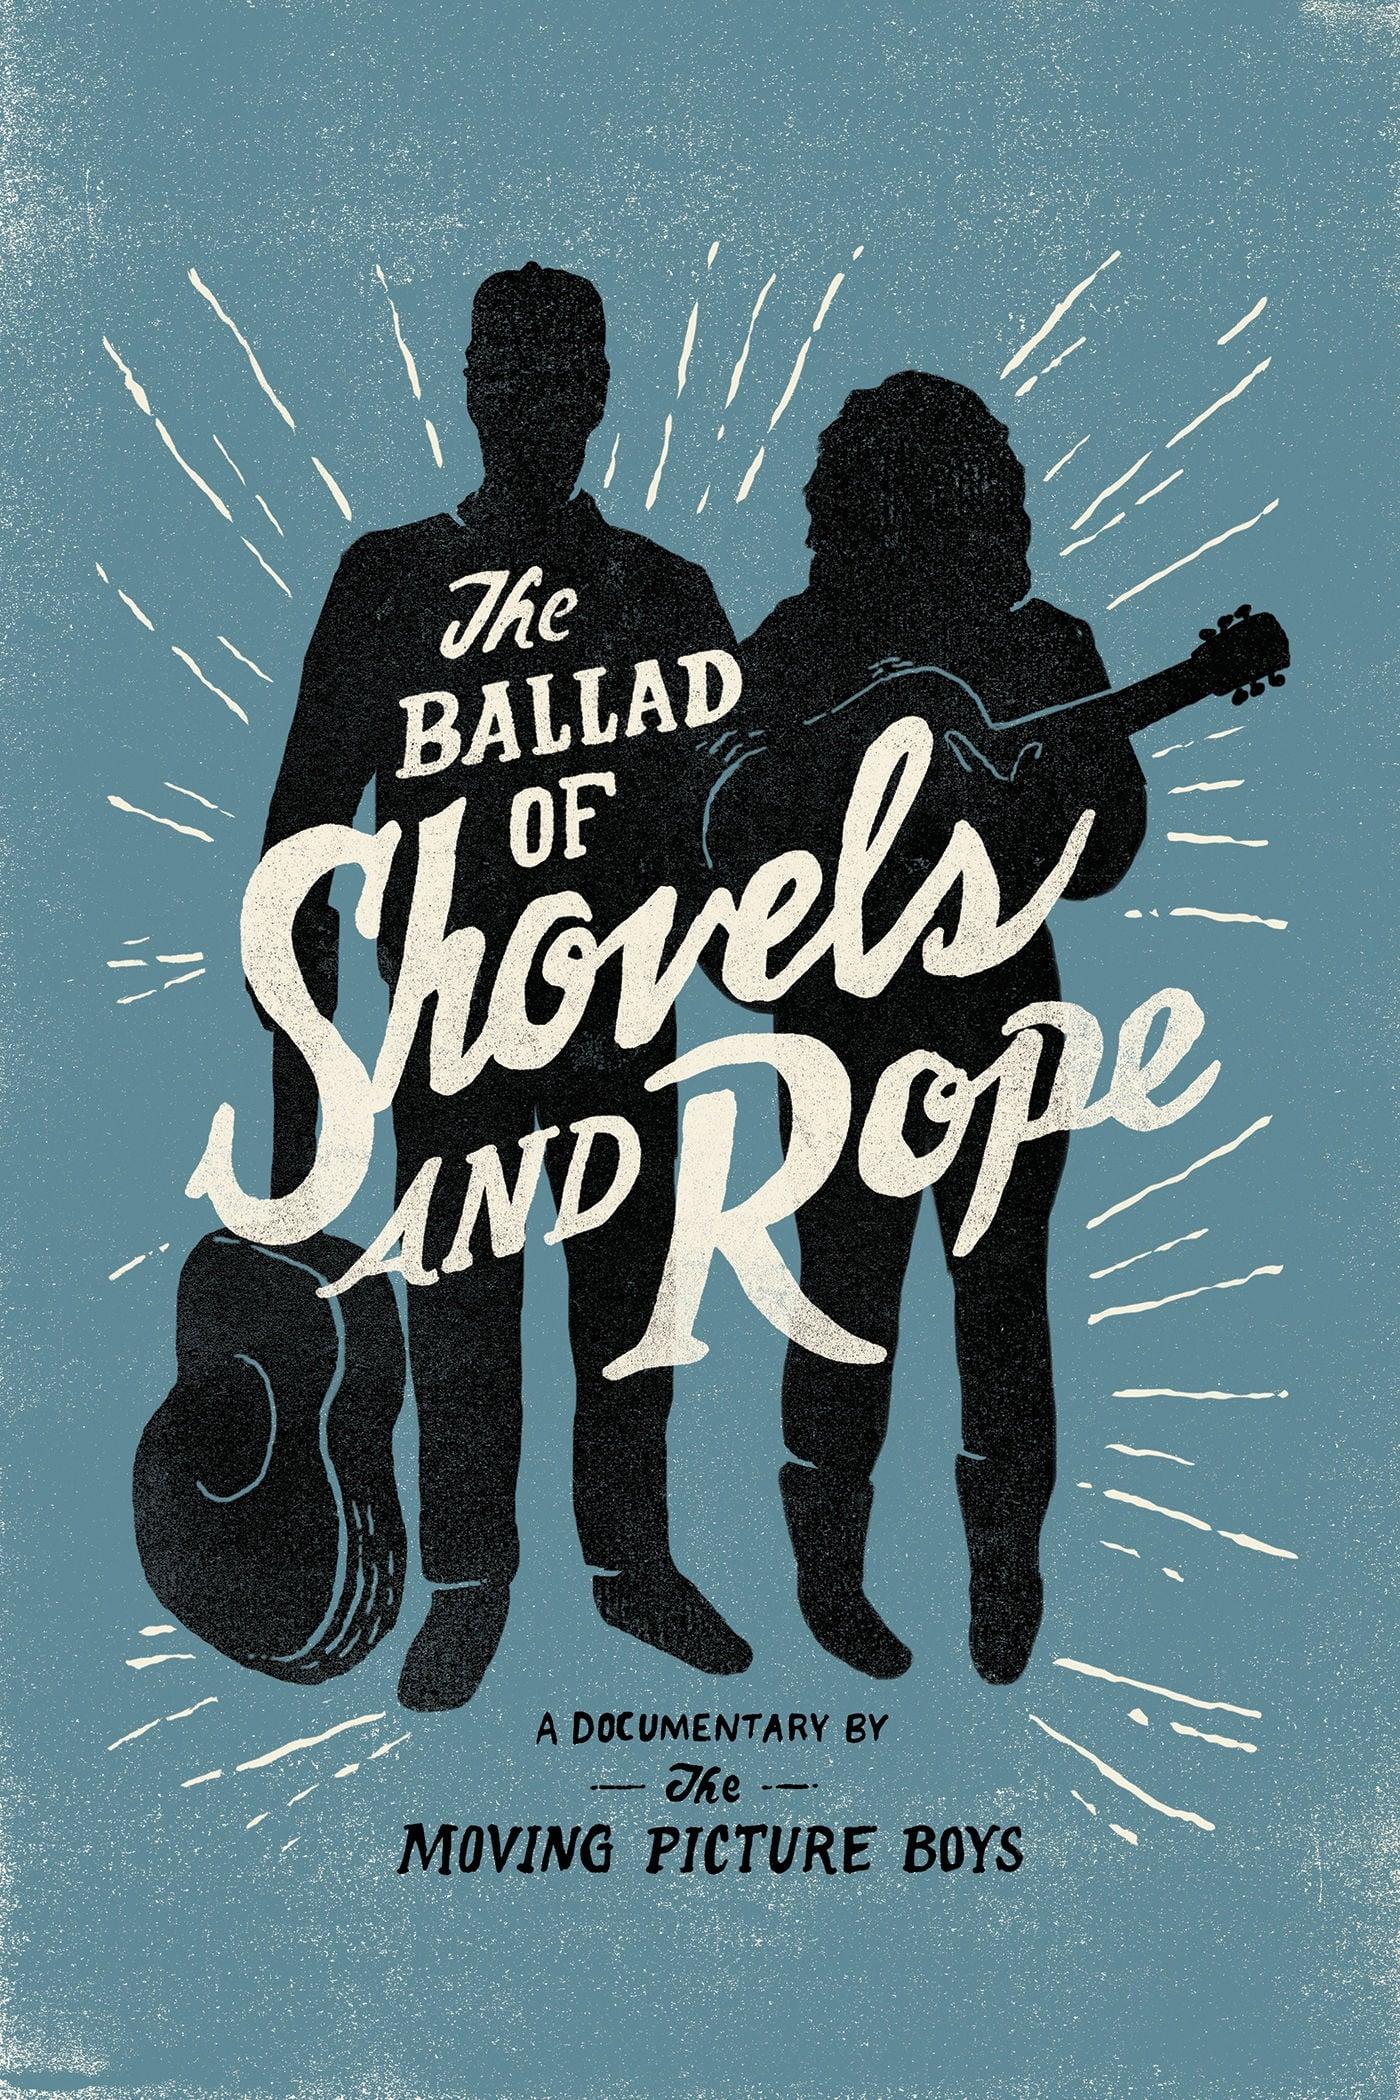 The Ballad of Shovels and Rope poster